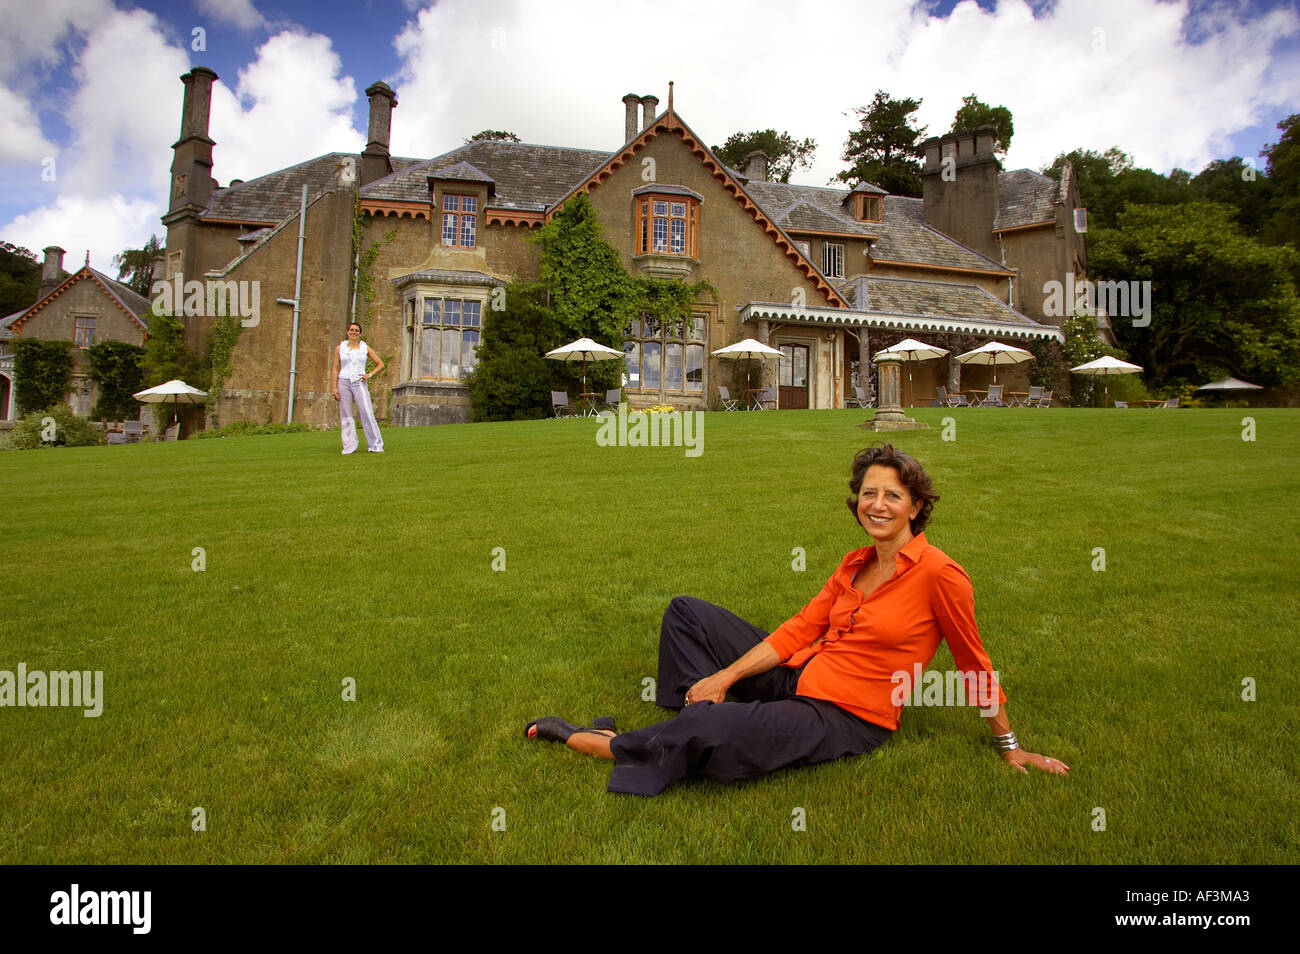 Hotel Endsleigh Milton Abbot Devon UK, owned by designer Olga Polizzi and run by her daughter Alex. Stock Photo